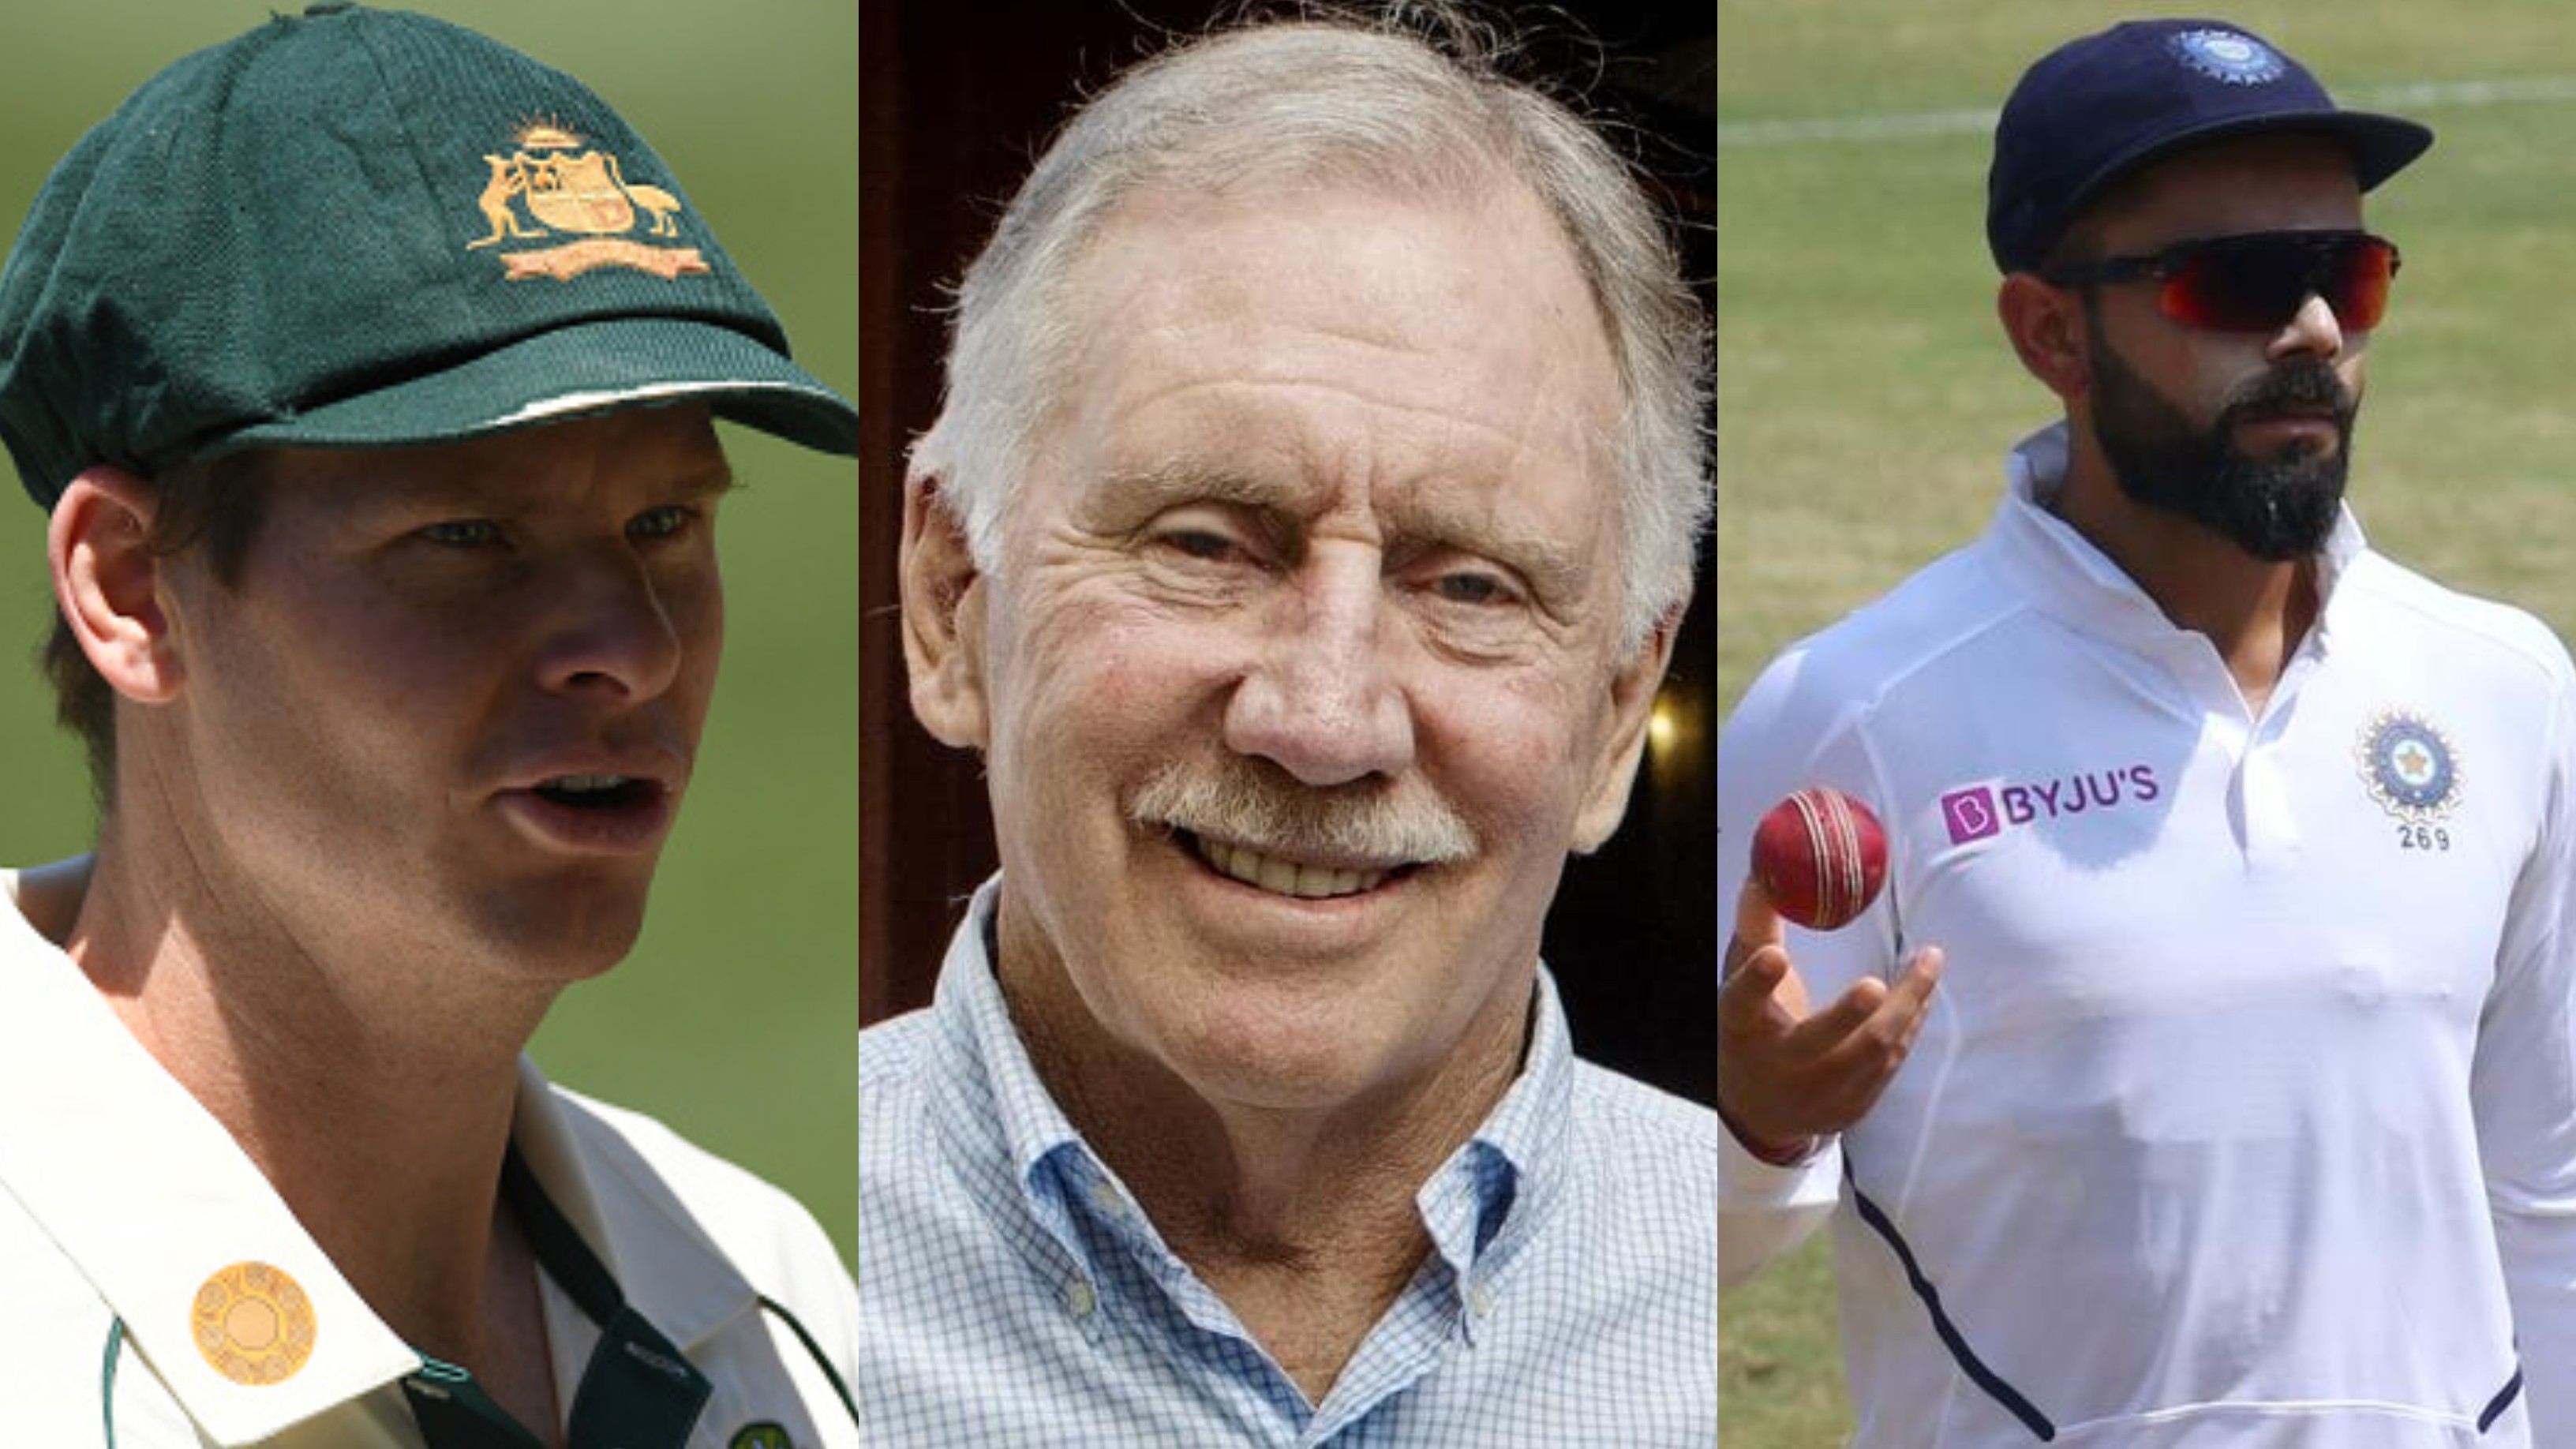 AUS v IND 2020-21: Ian Chappell advises India to bowl full to Steve Smith to trouble him